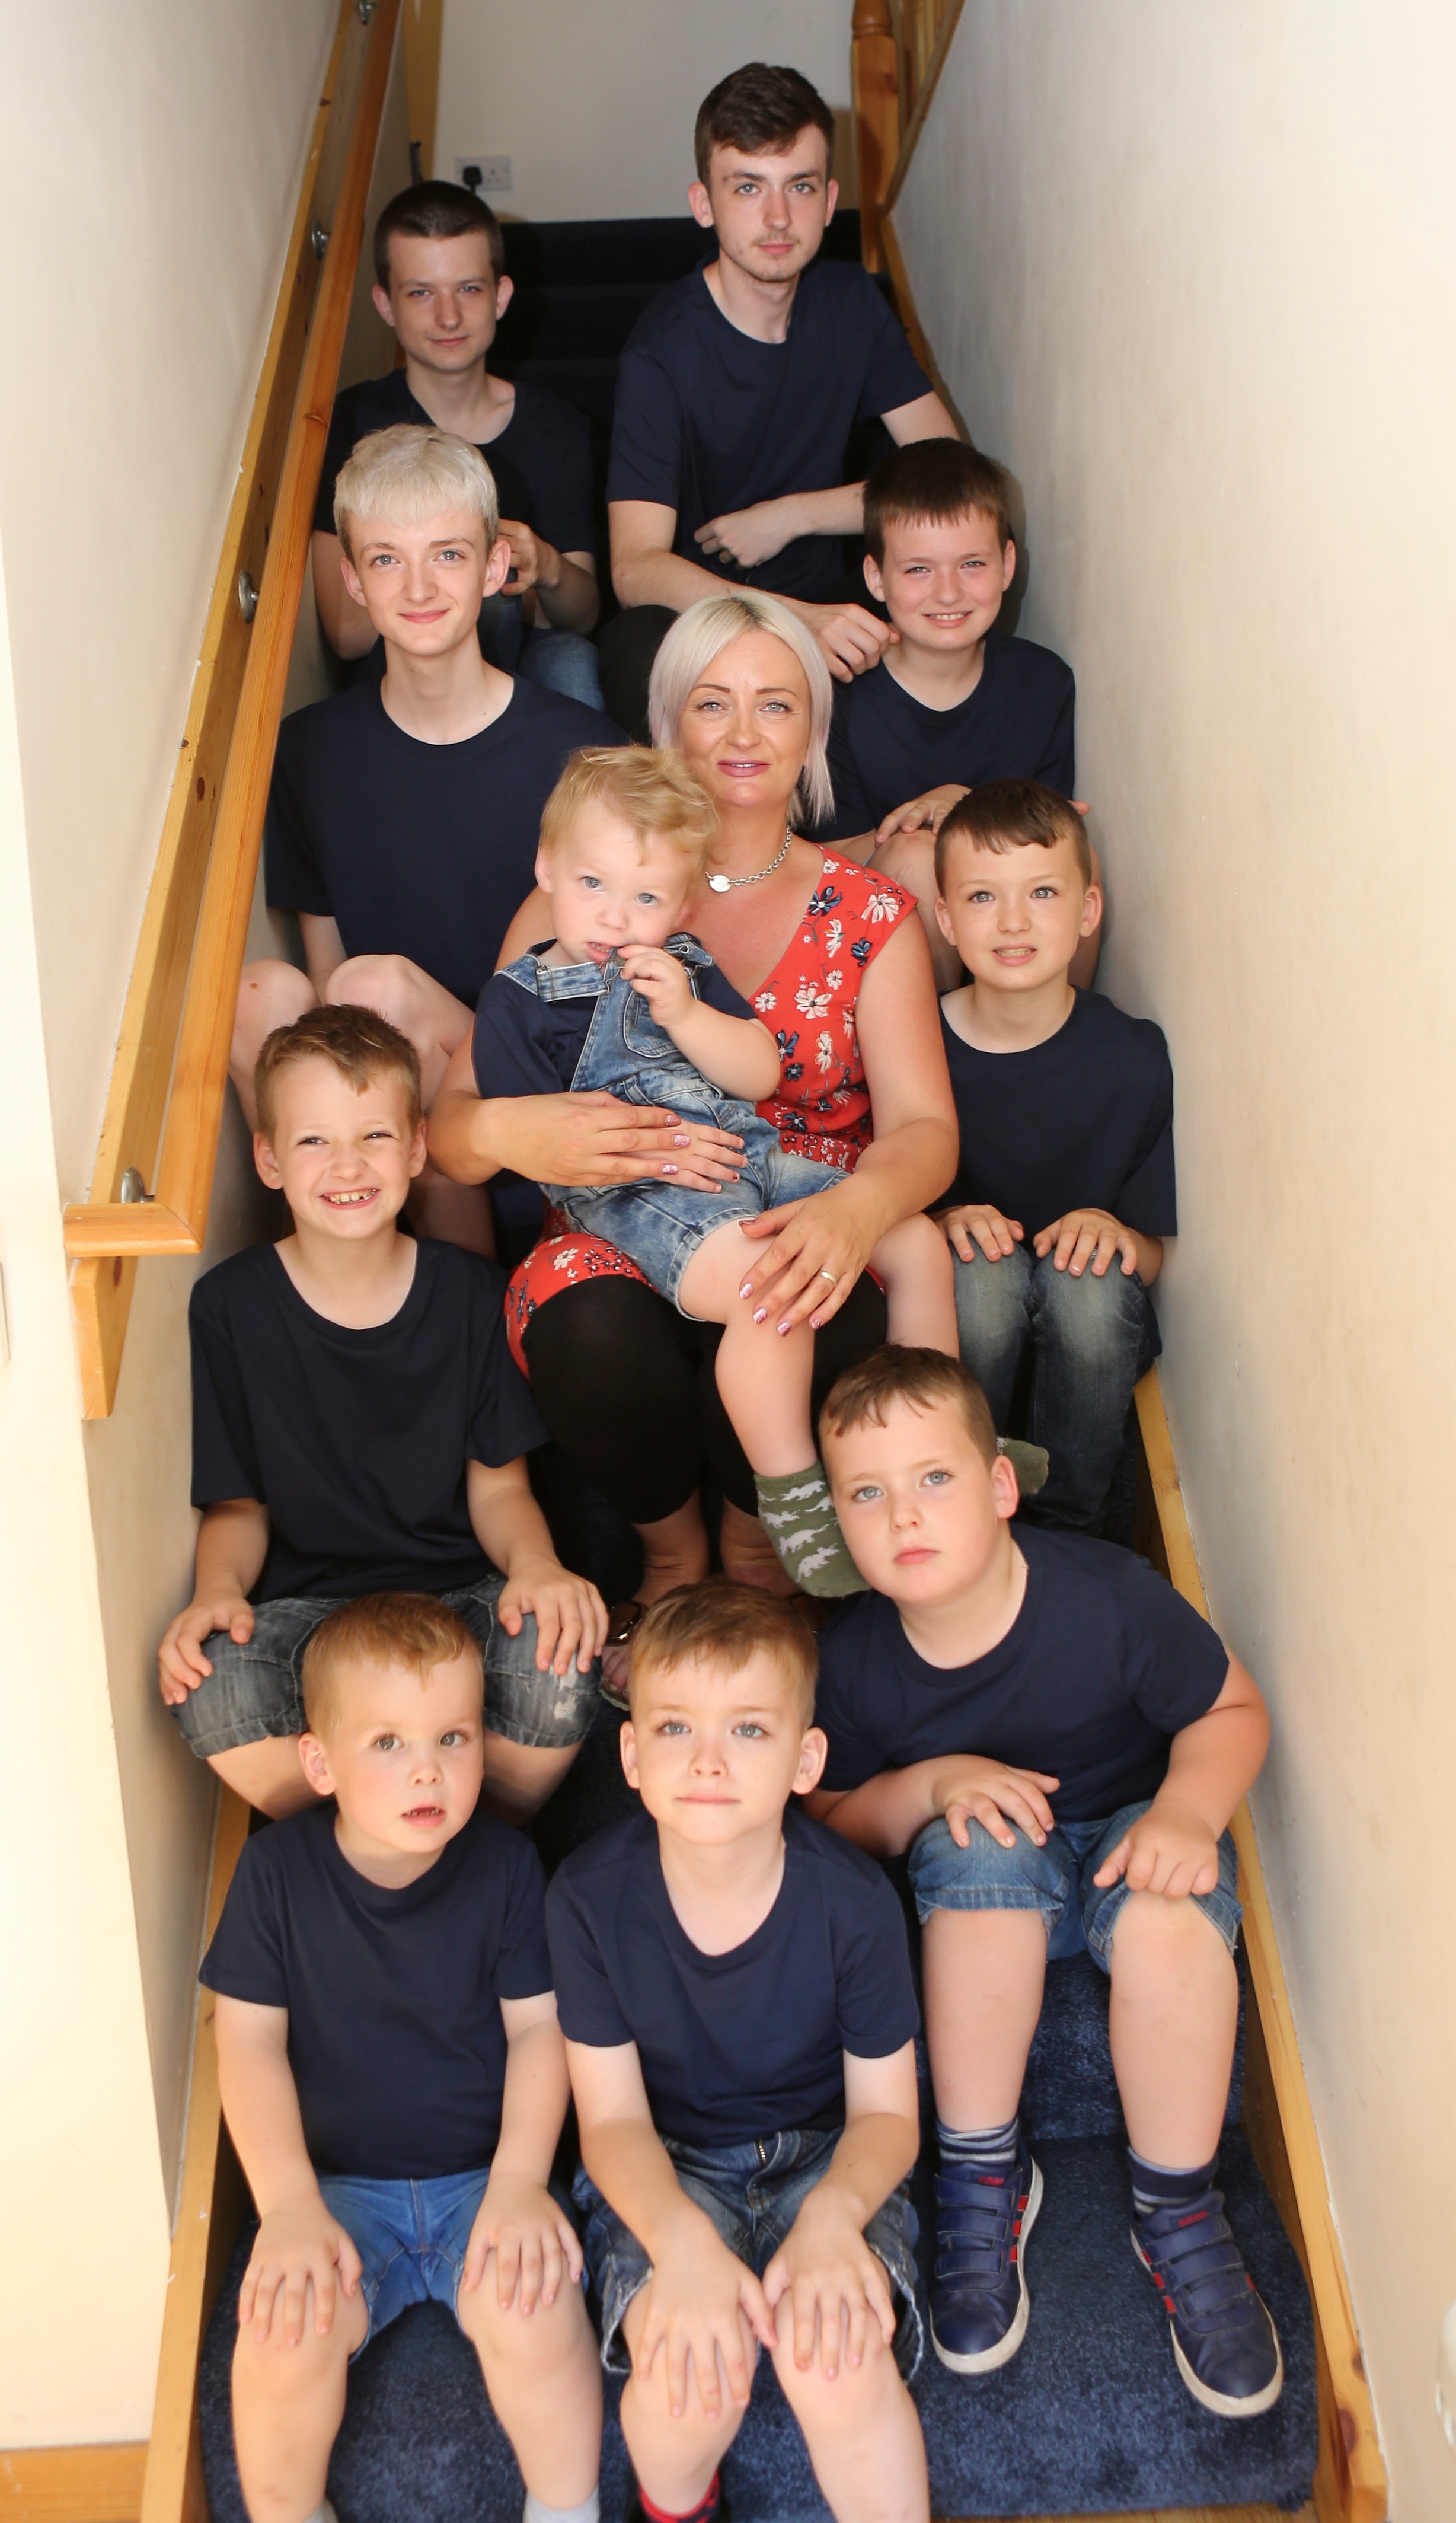 Alexis Brett welcomed 10 sons before she discovered she was pregnant with another baby.